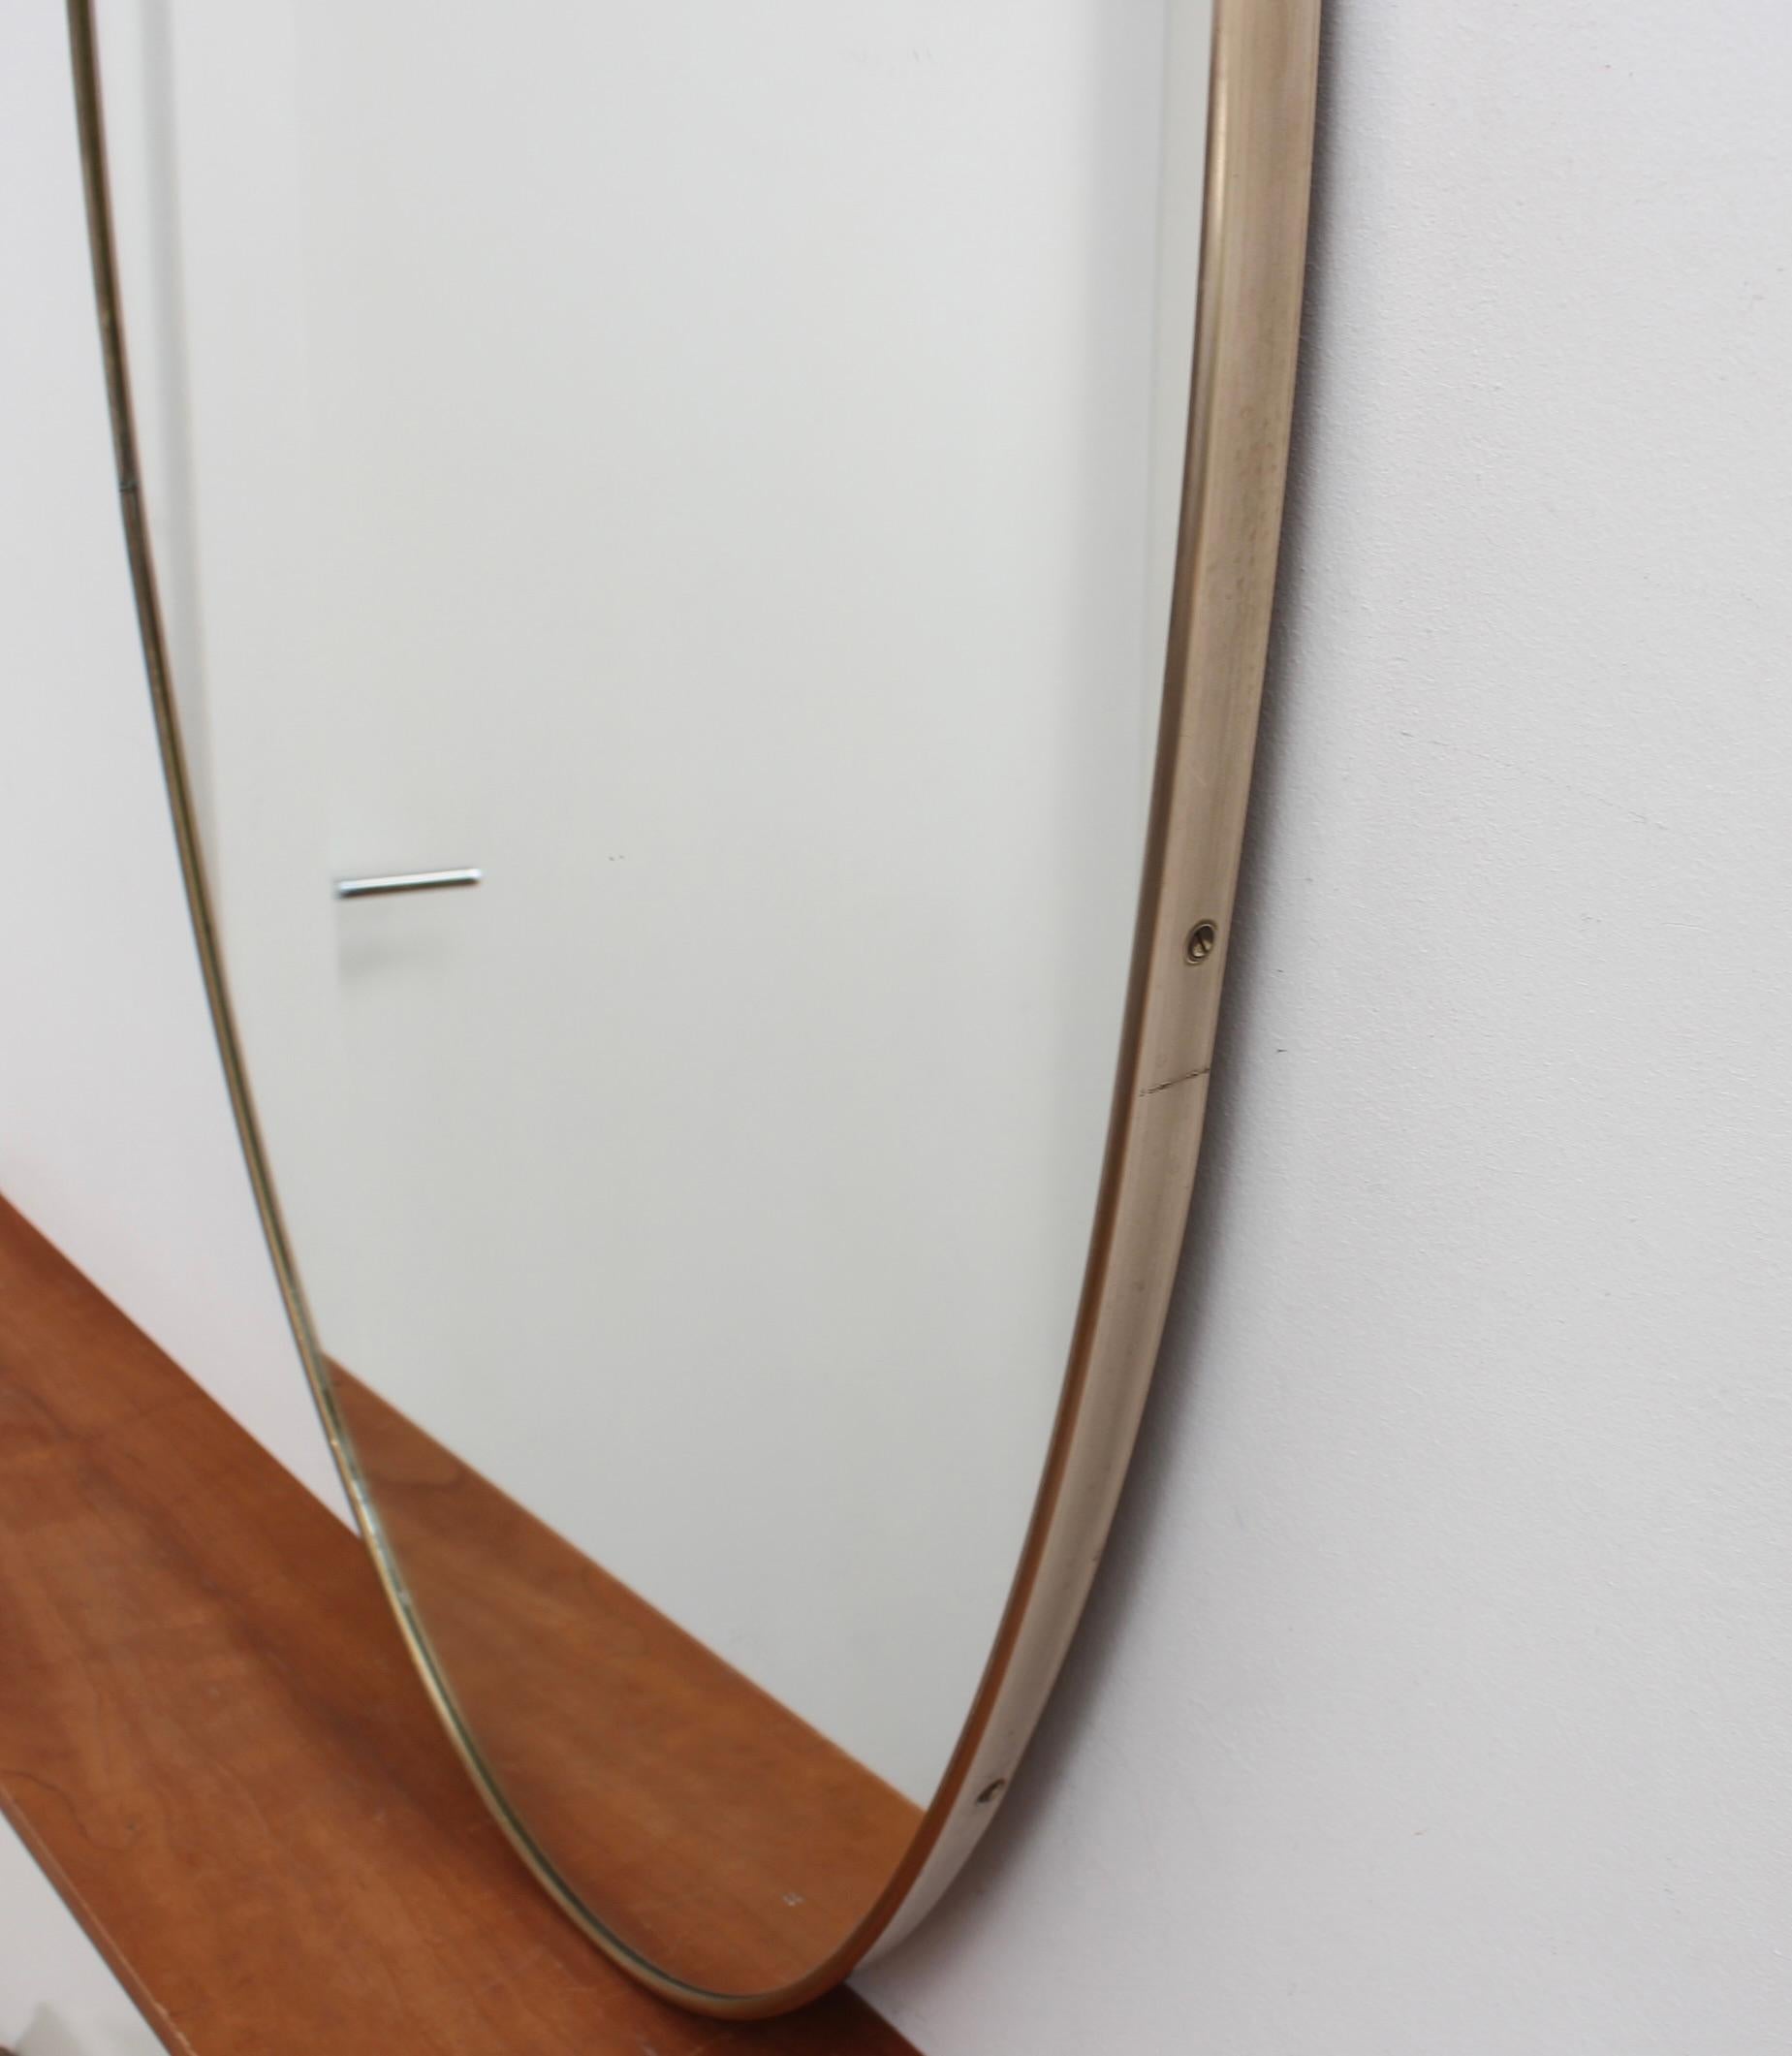 Midcentury Italian Wall Mirror with Brass Frame, 'circa 1950s' For Sale 6